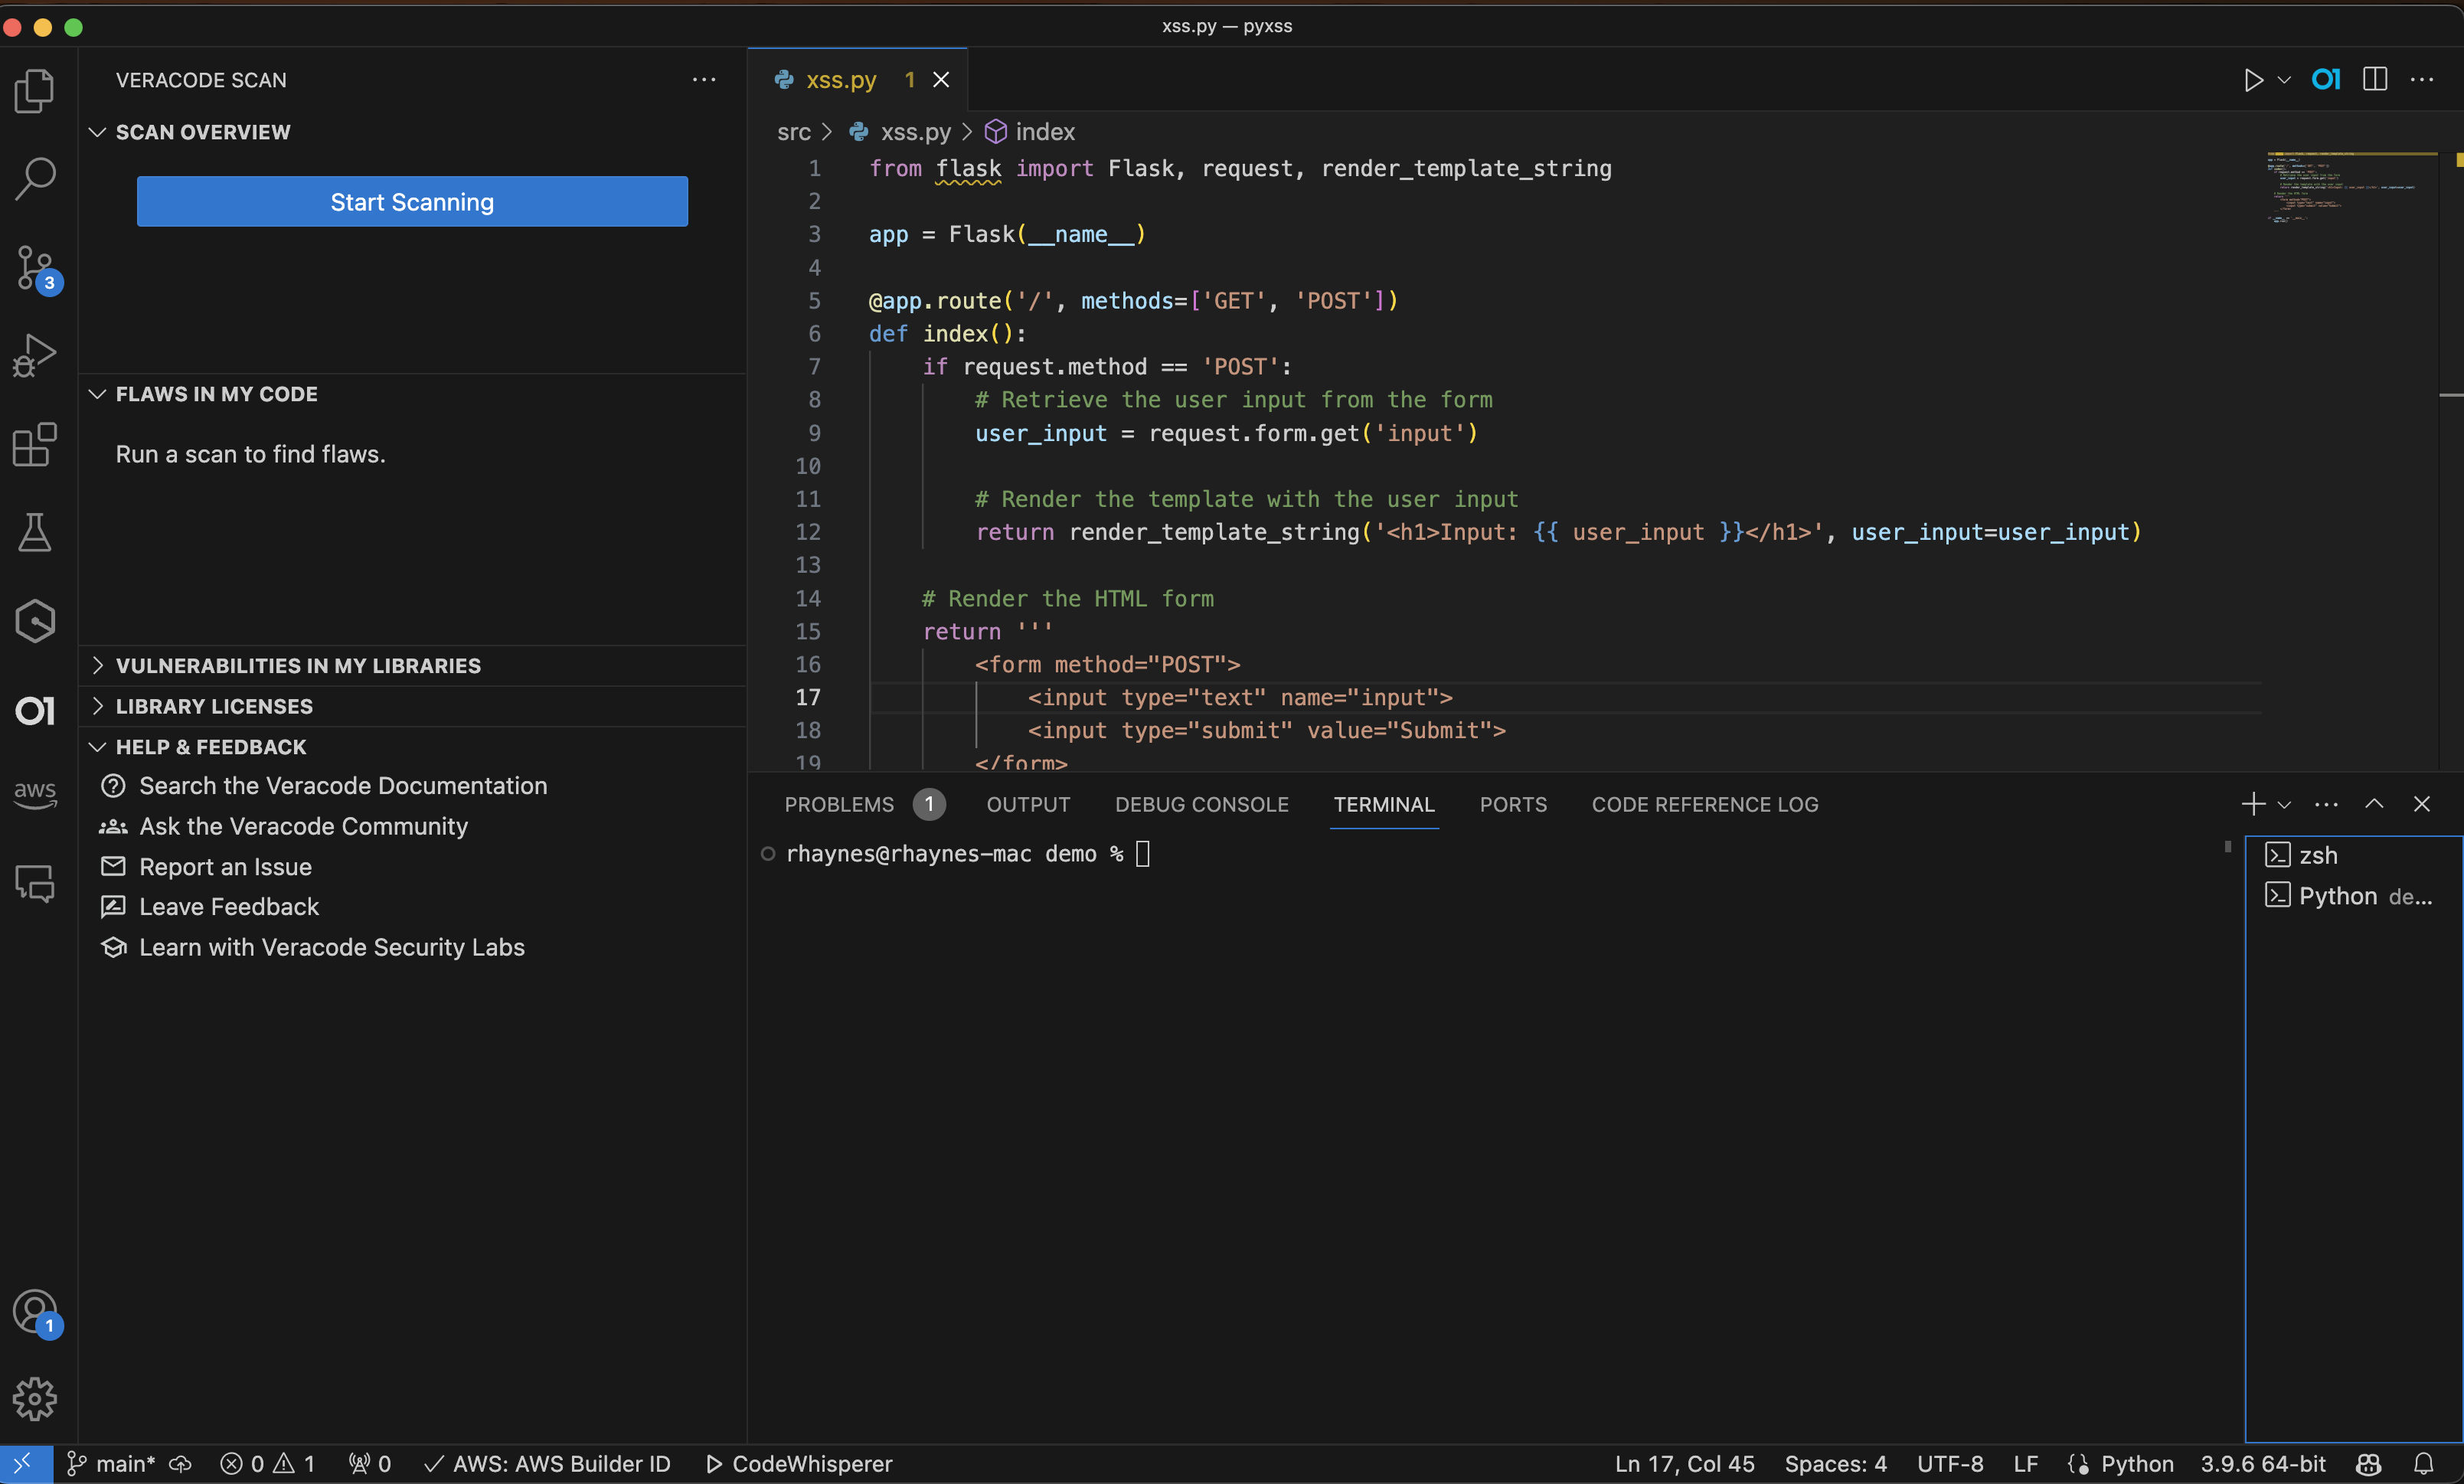 VS Code with Veracode Scan